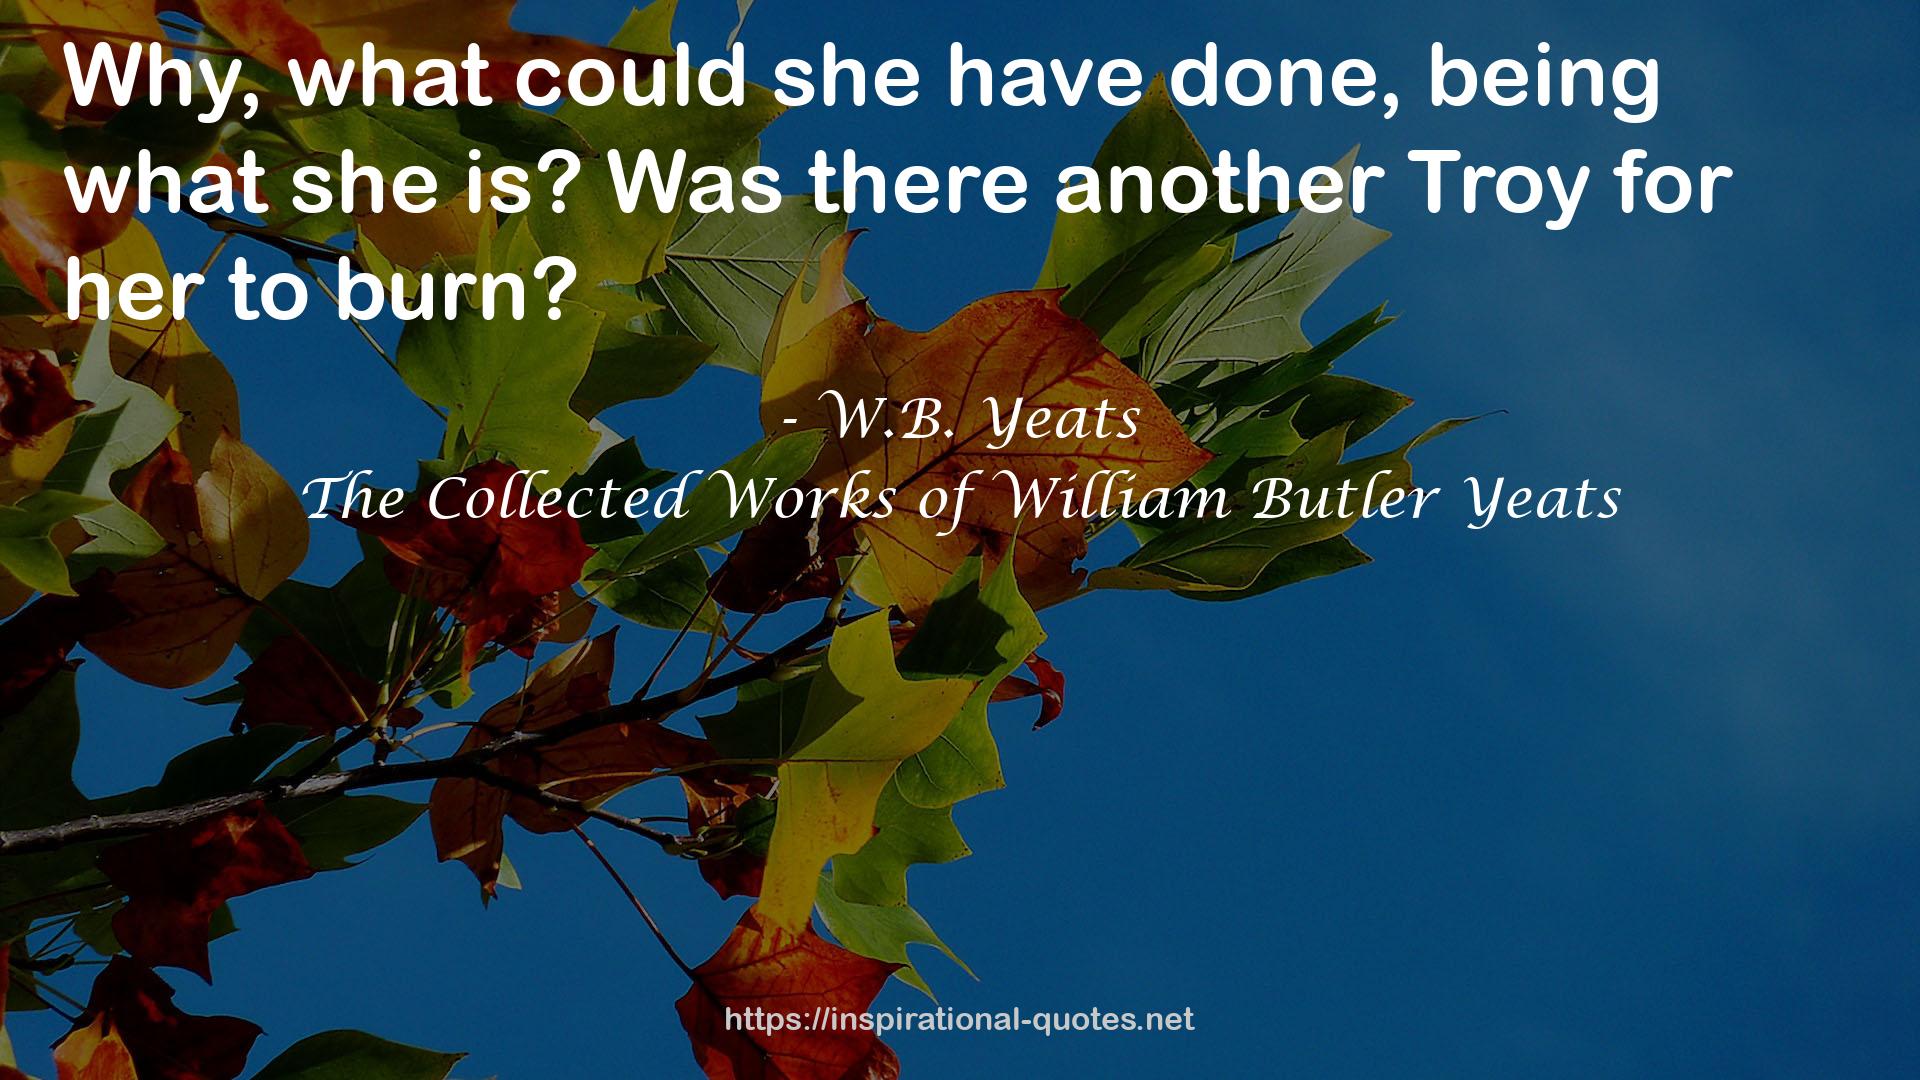 The Collected Works of William Butler Yeats QUOTES